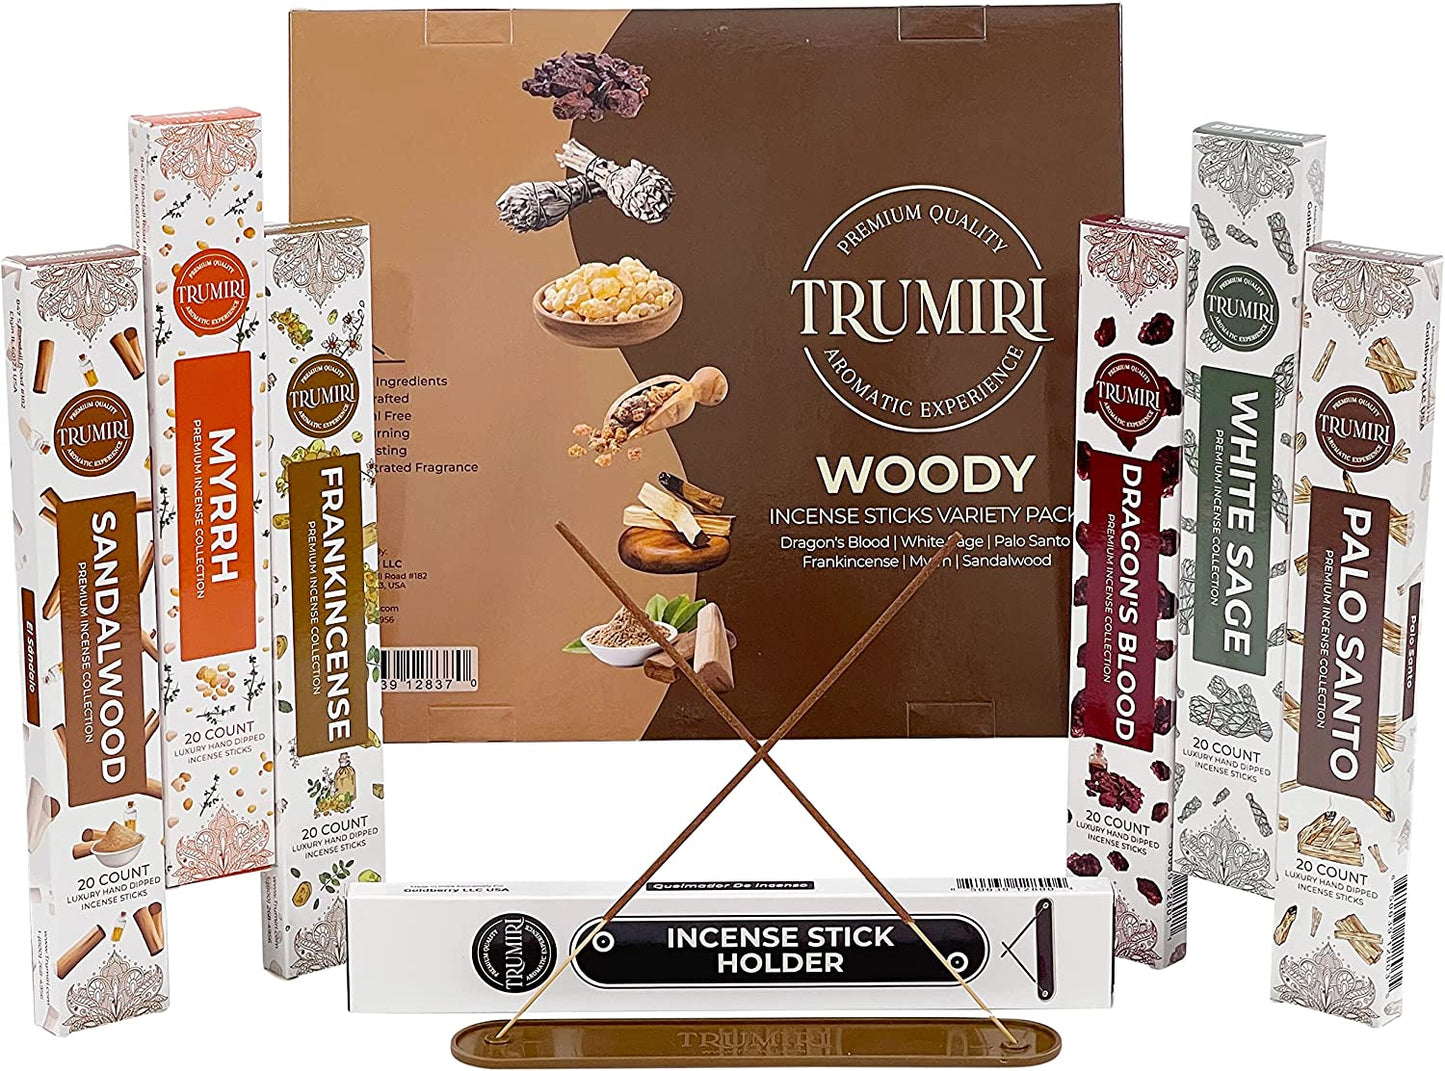 Woody Incense Sticks Variety Pack - 120 Insence-Sticks (6 Incents X 20 Insenses) - White Sage, Palo Santo, Dragons Blood, Sandalwood - Natural Incense Set Inciensos with Stick Incense Holder